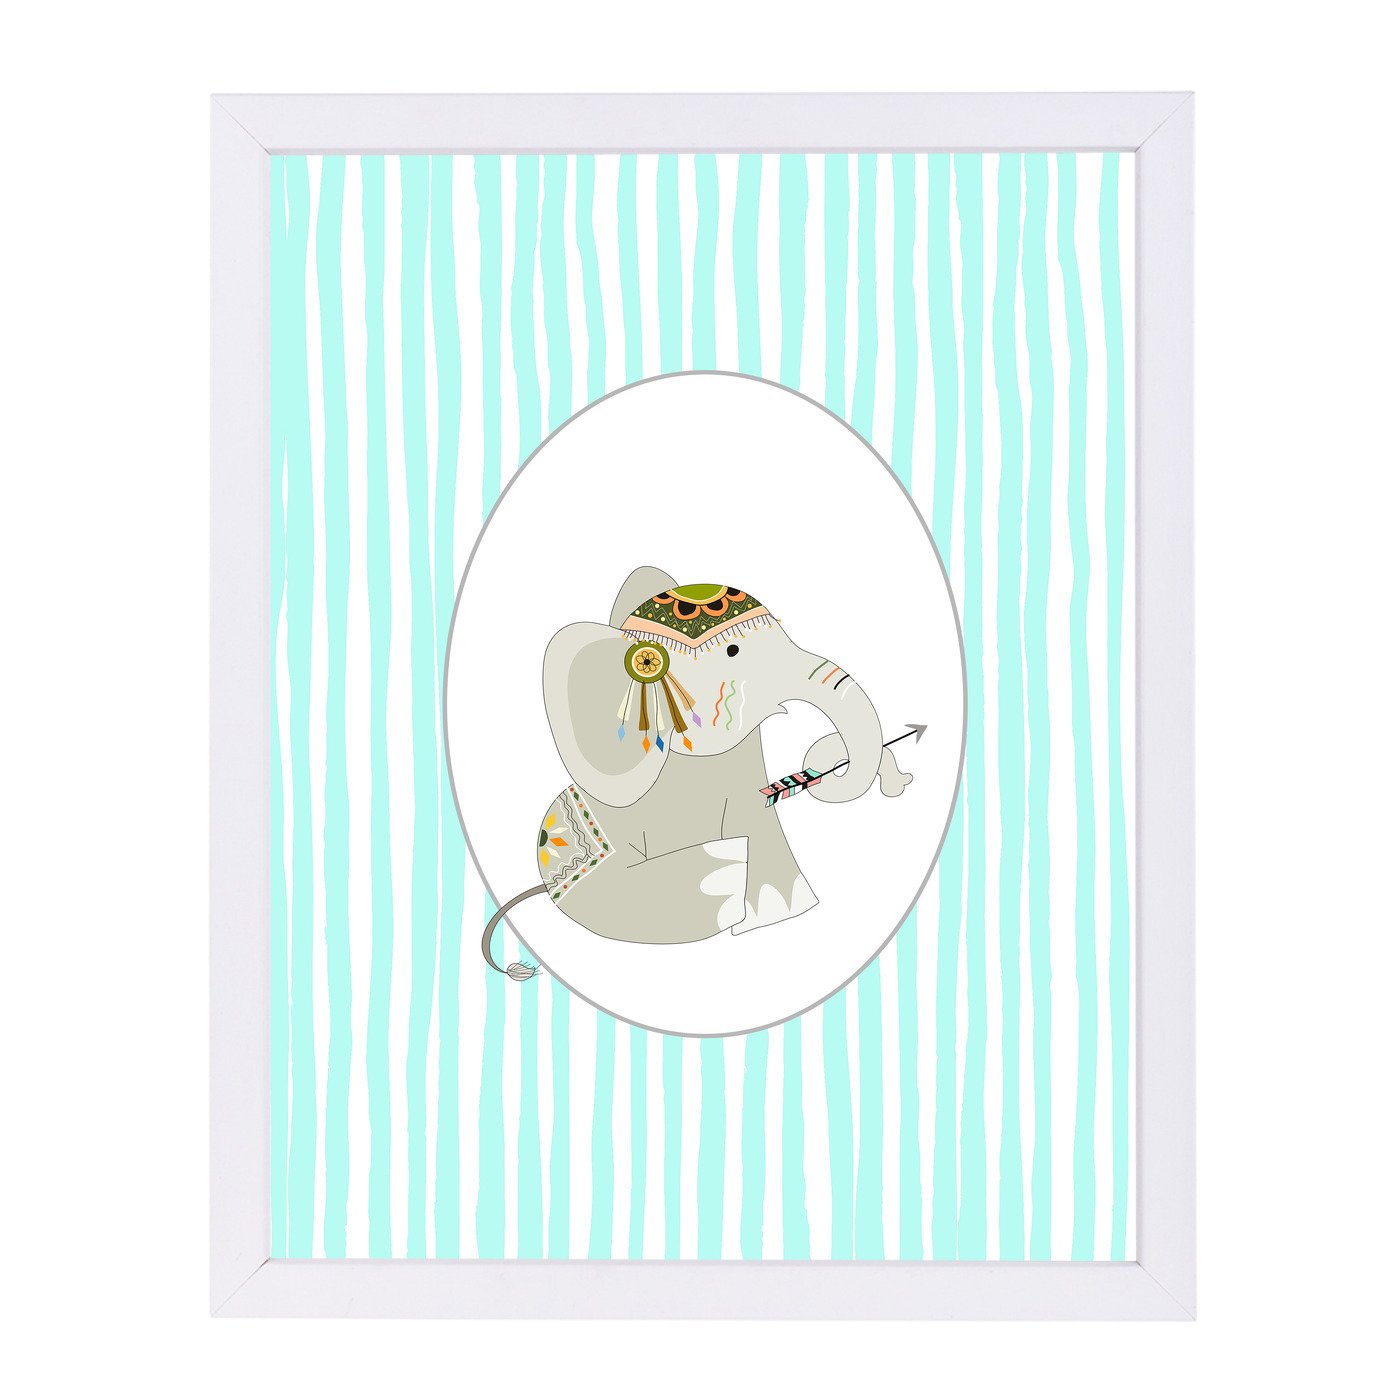 Tribal Elephant In Oval By Wall + Wonder - Framed Print - Americanflat